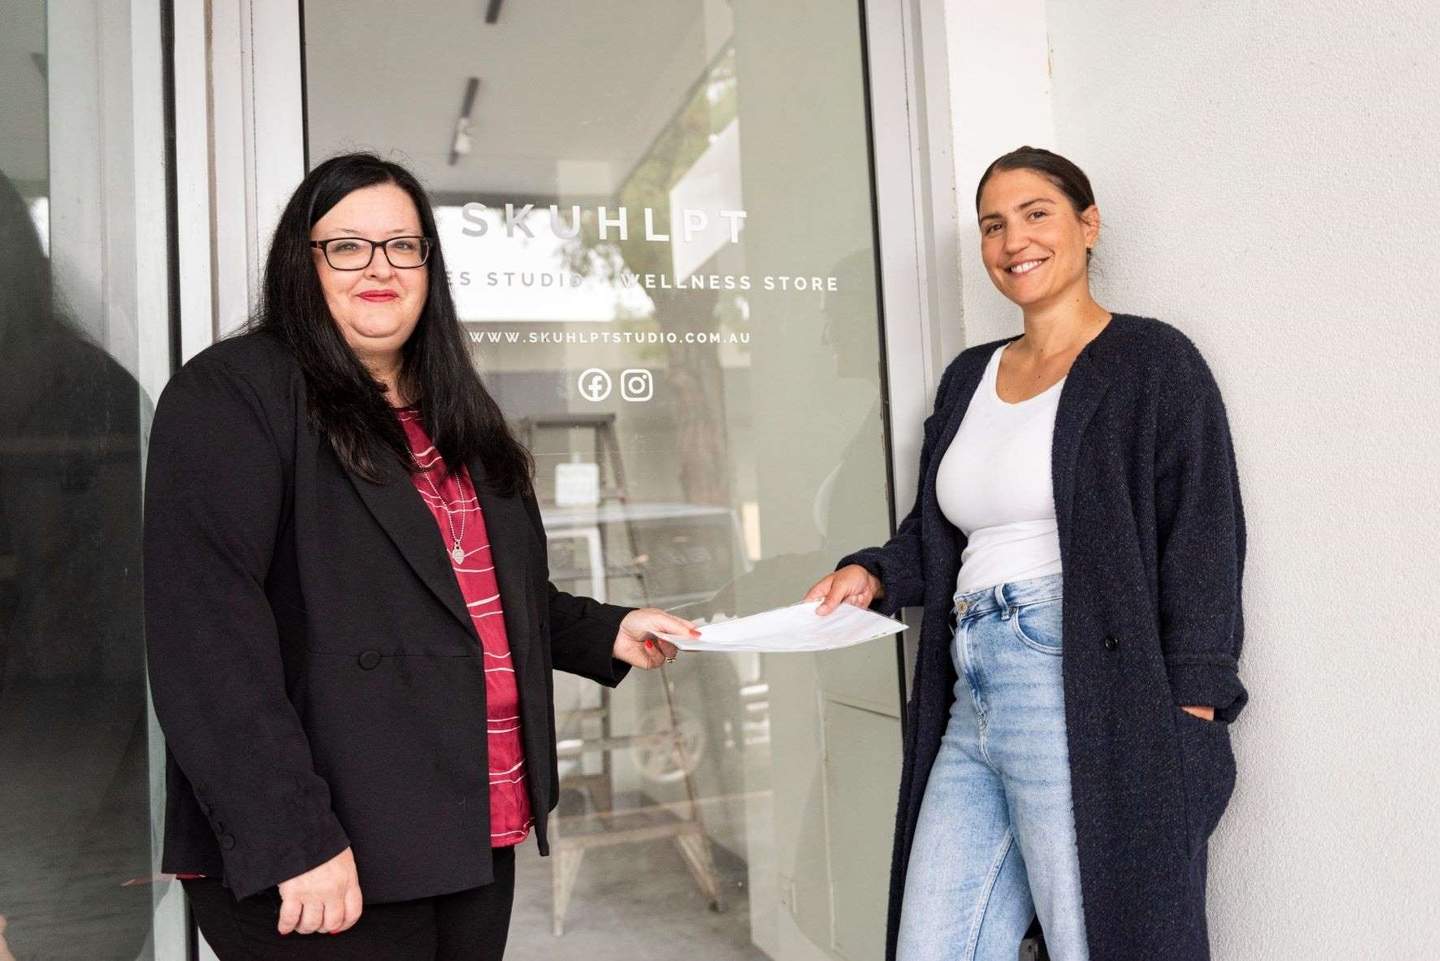 New bizz- Marcela (right) receives help from Council's Business Concierge Julie (left) to get moving on her soon to be pilates studio- Skuhlpt.